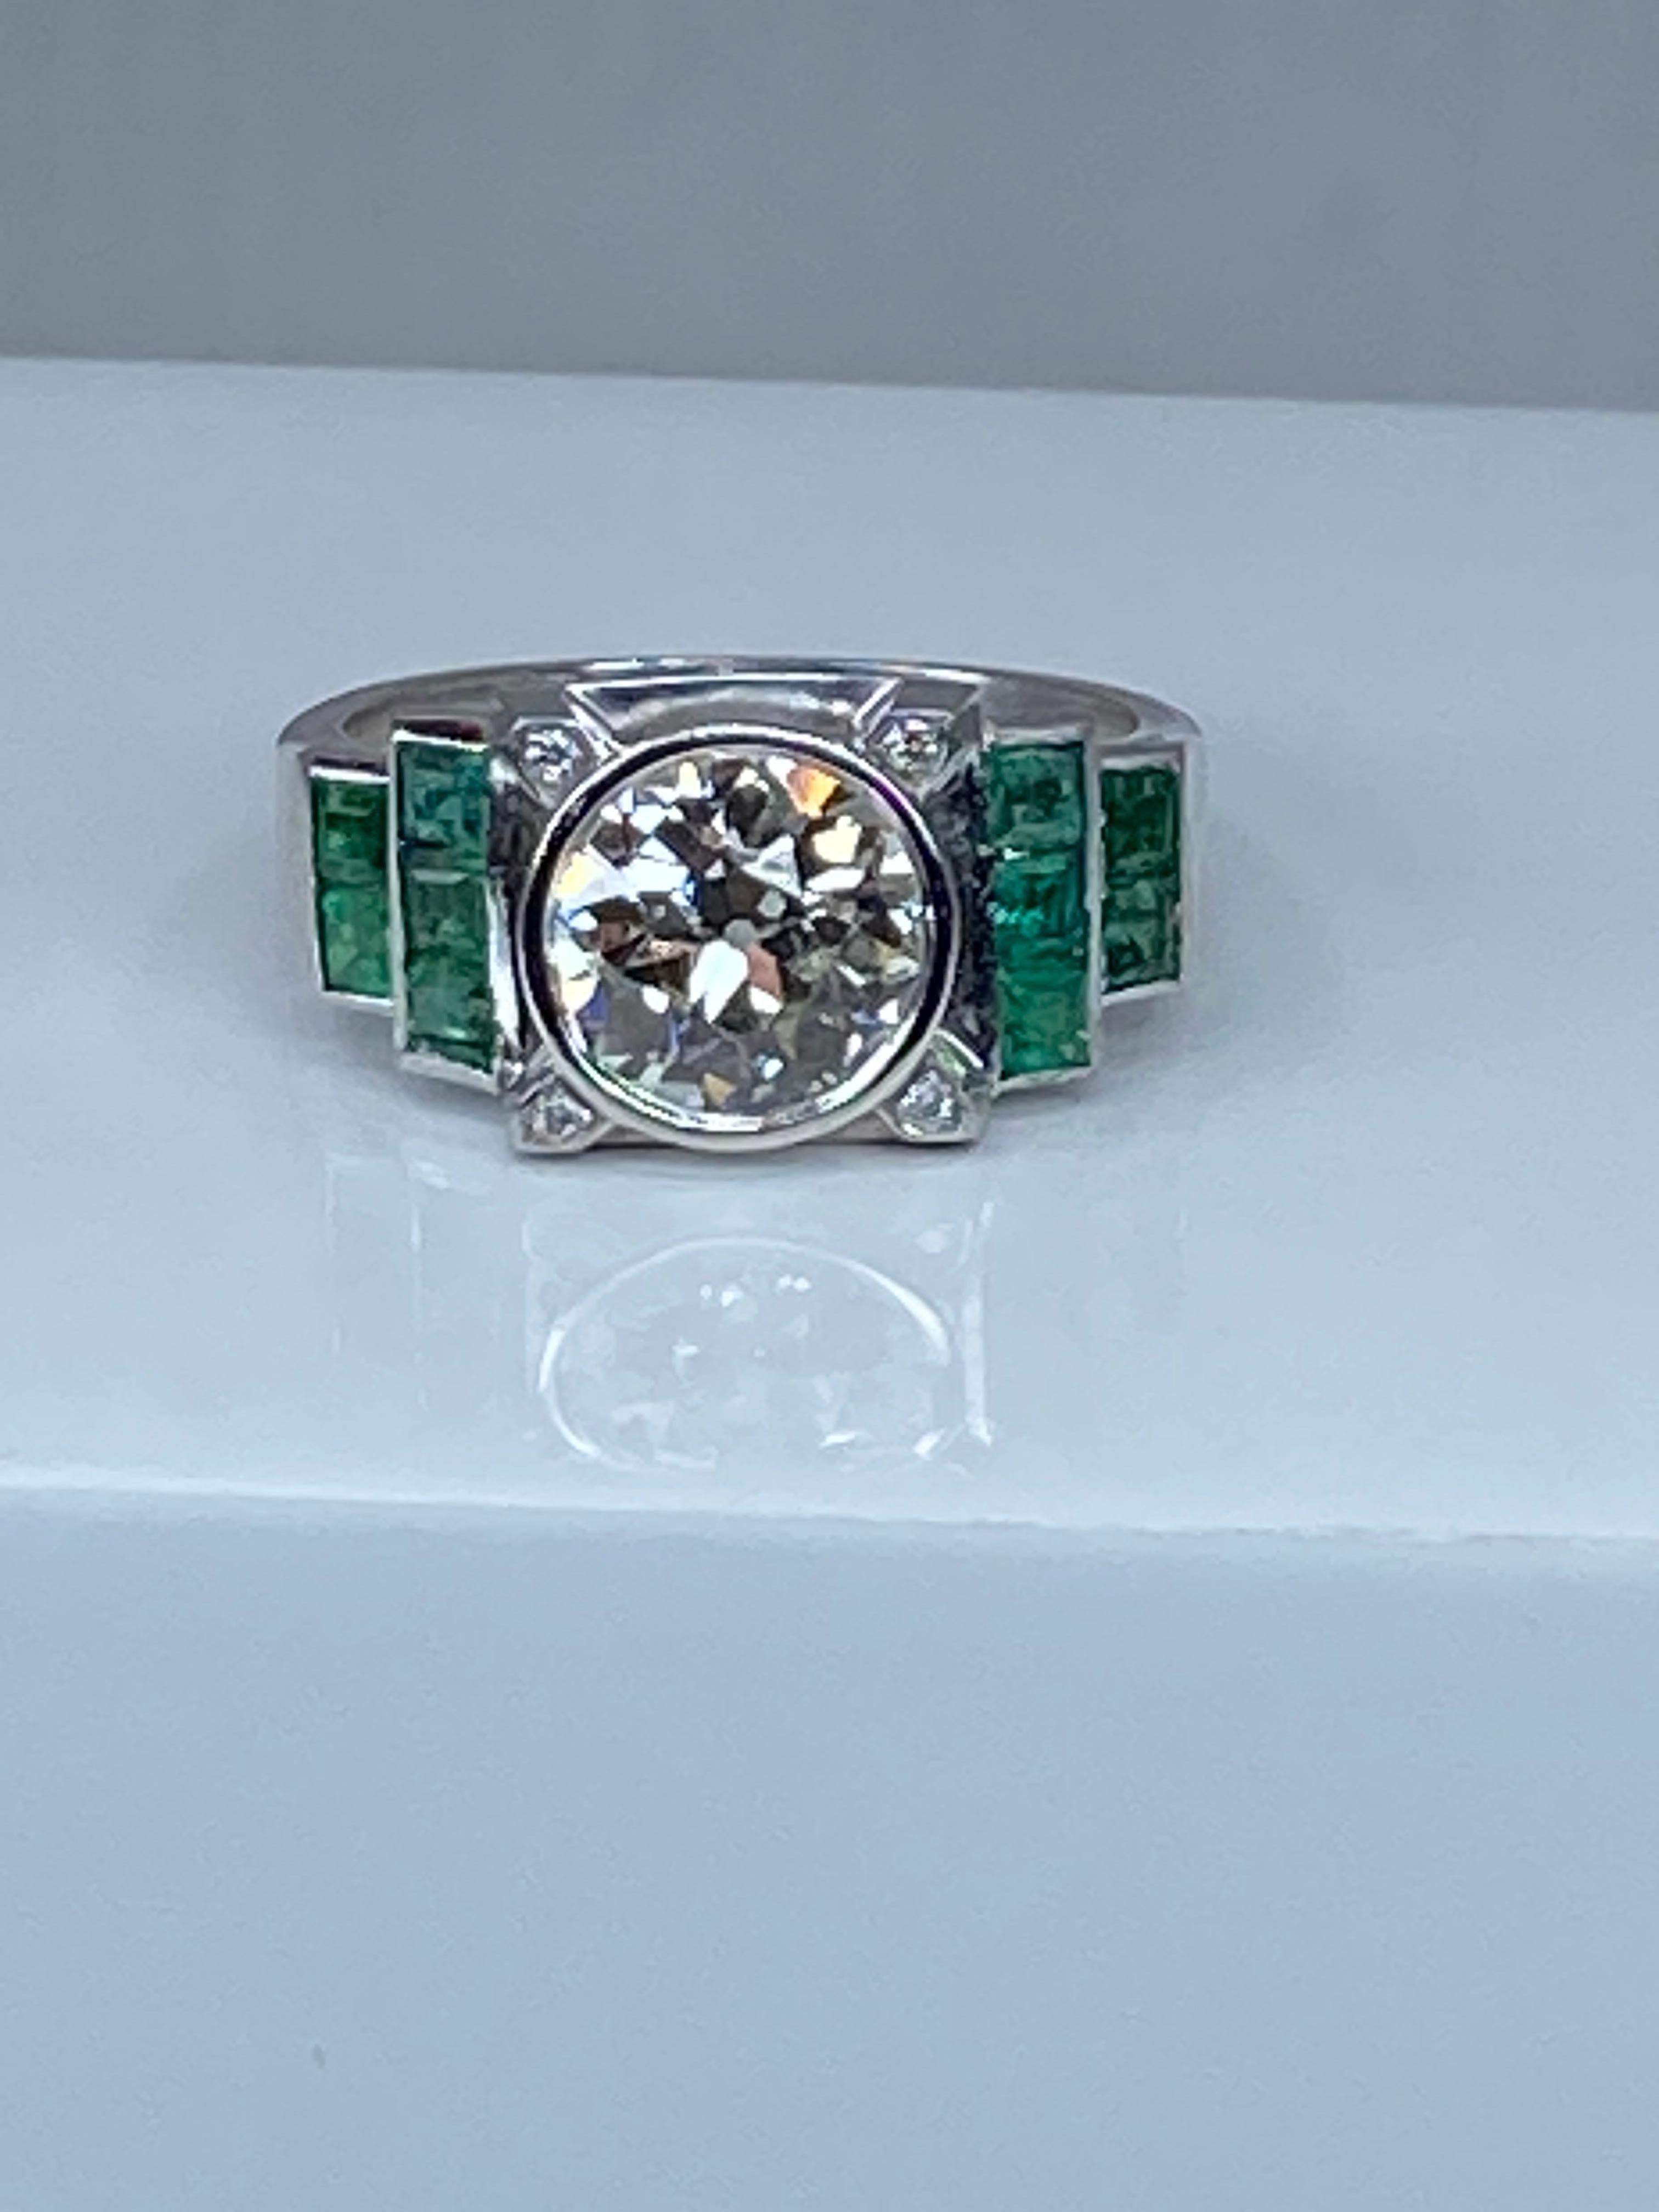 Platinium Engagement Ring Set with a 1.55 Carat Diamond Backed by Emeralds, 1900 For Sale 6